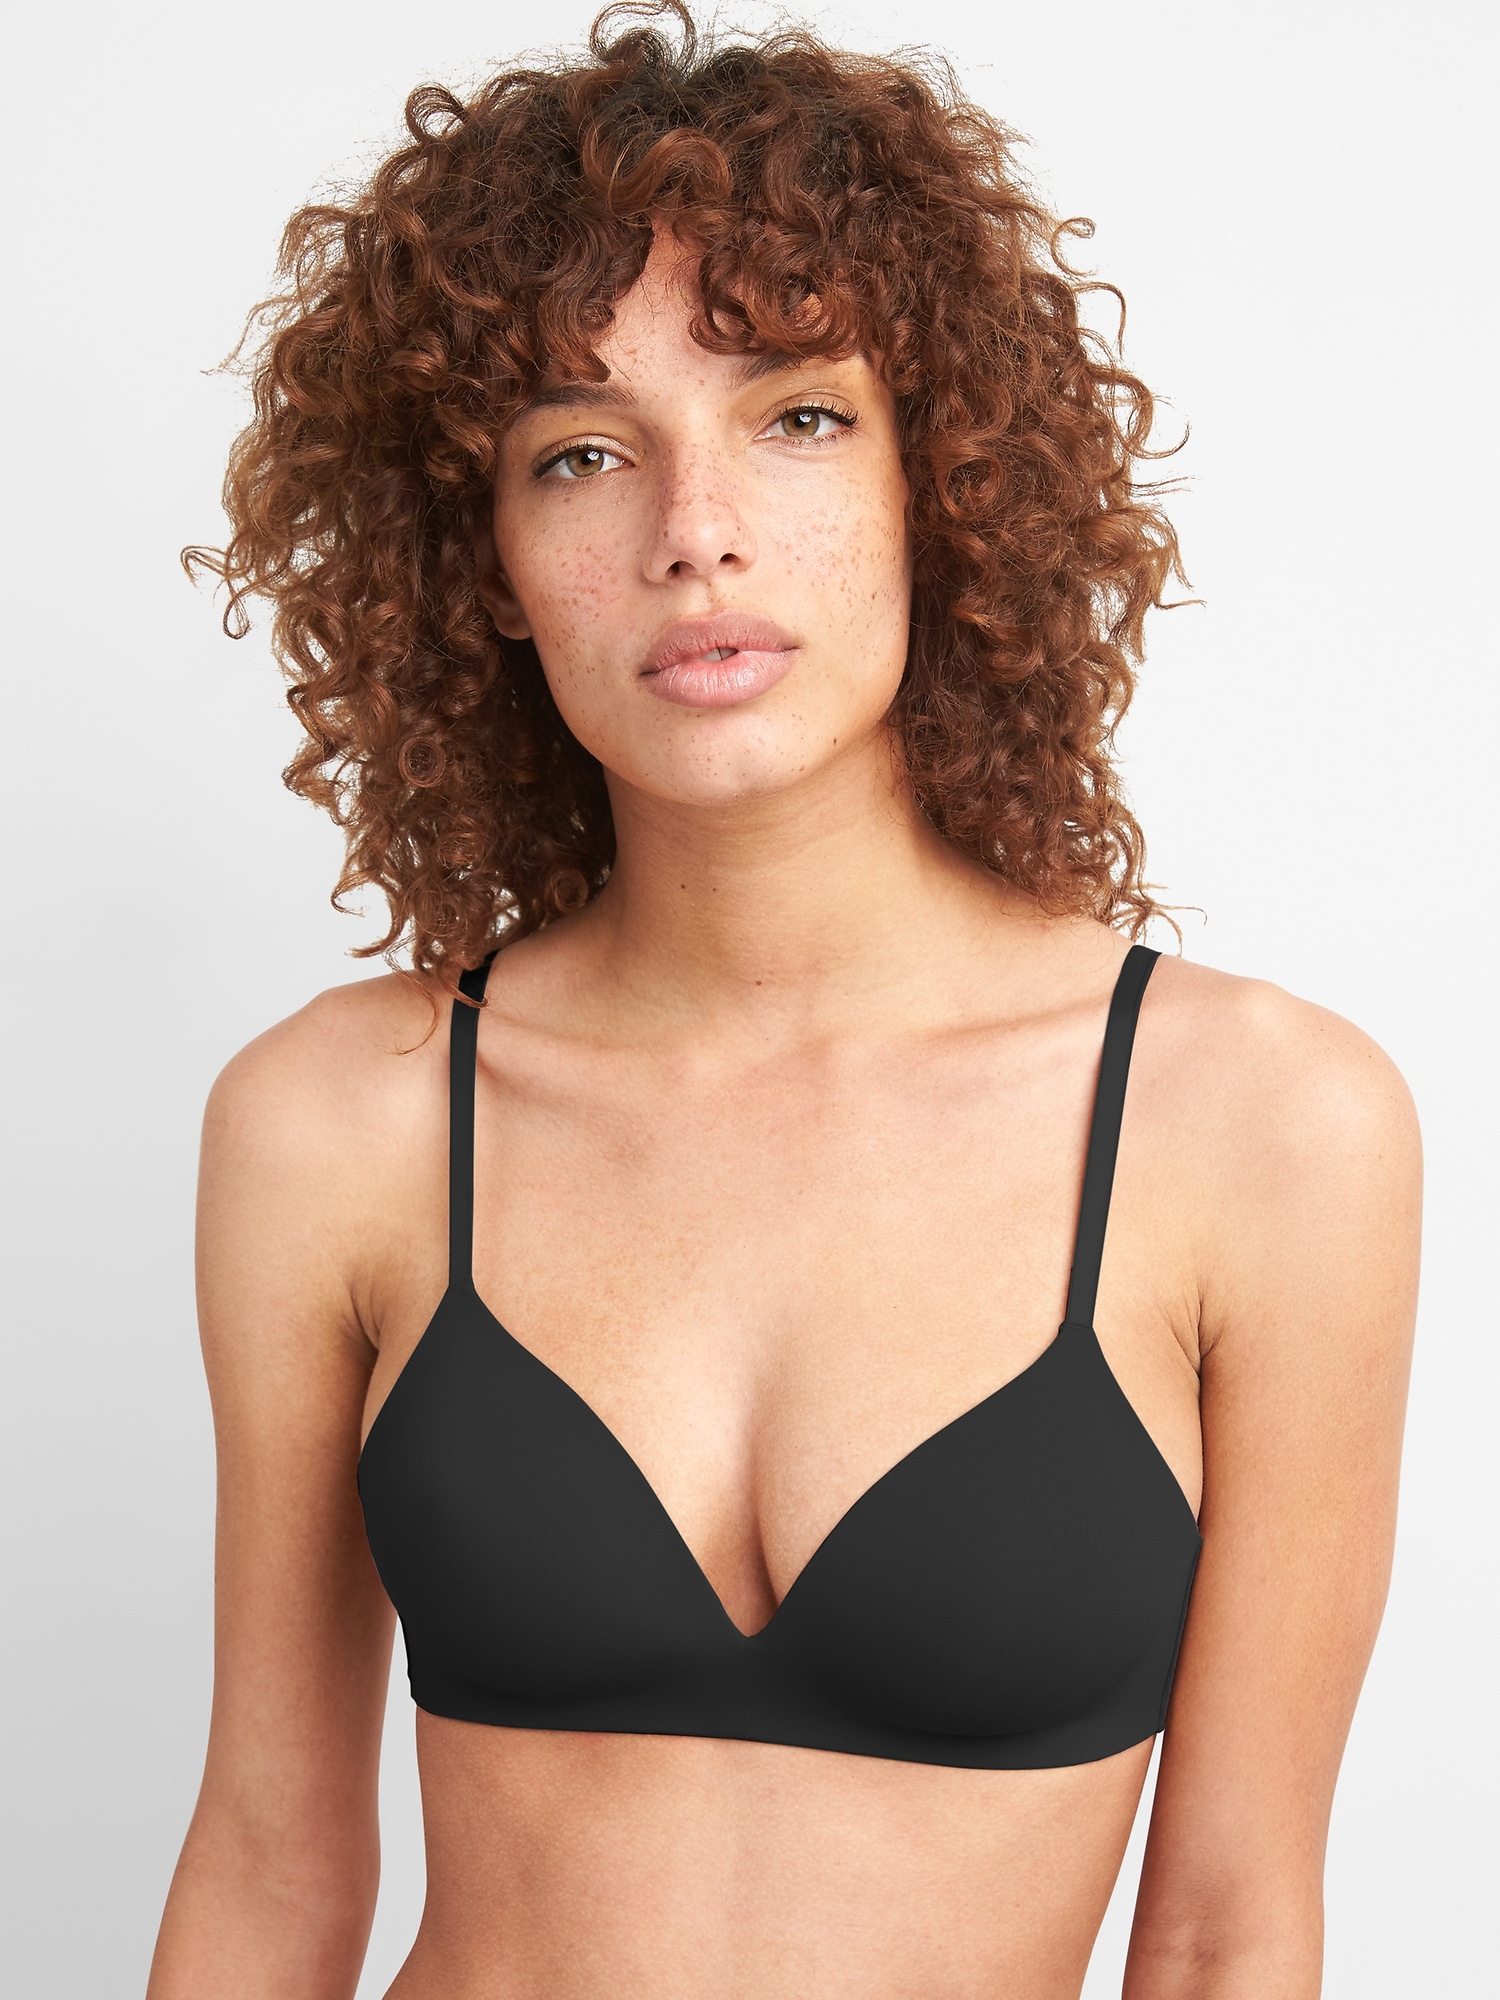 DKNY Women's Cut-Out Lace Bralette, Wirefree, Black Plum, Small